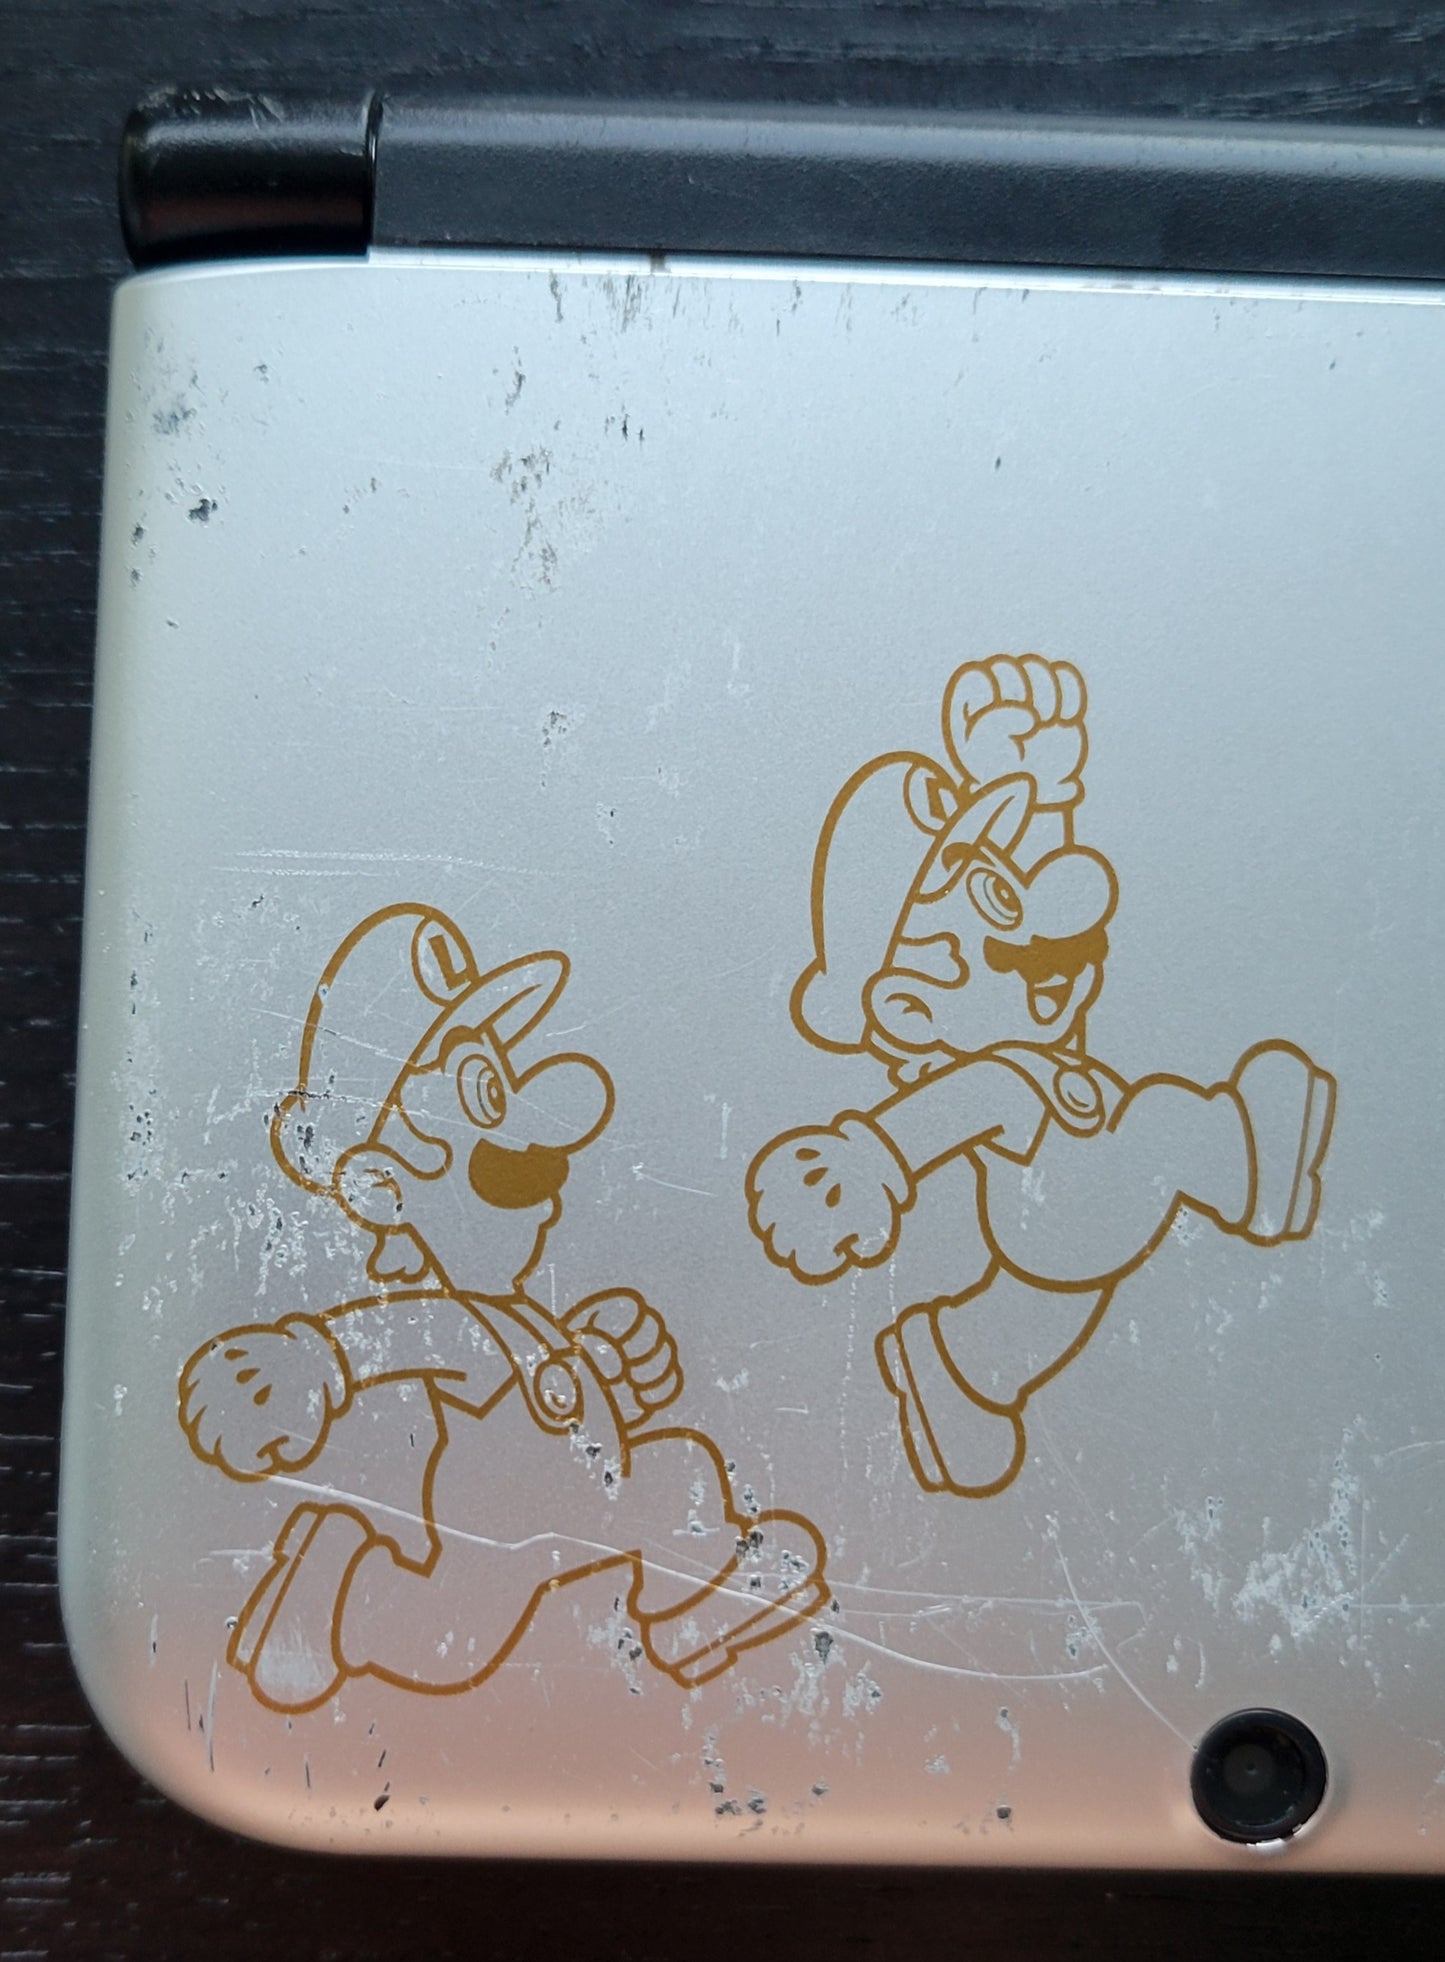 Nintendo 3DS XL: *Extremely Rare* The Year Of Luigi Edition! + Manual & Inserts OLED Technology Tested & Working Great!